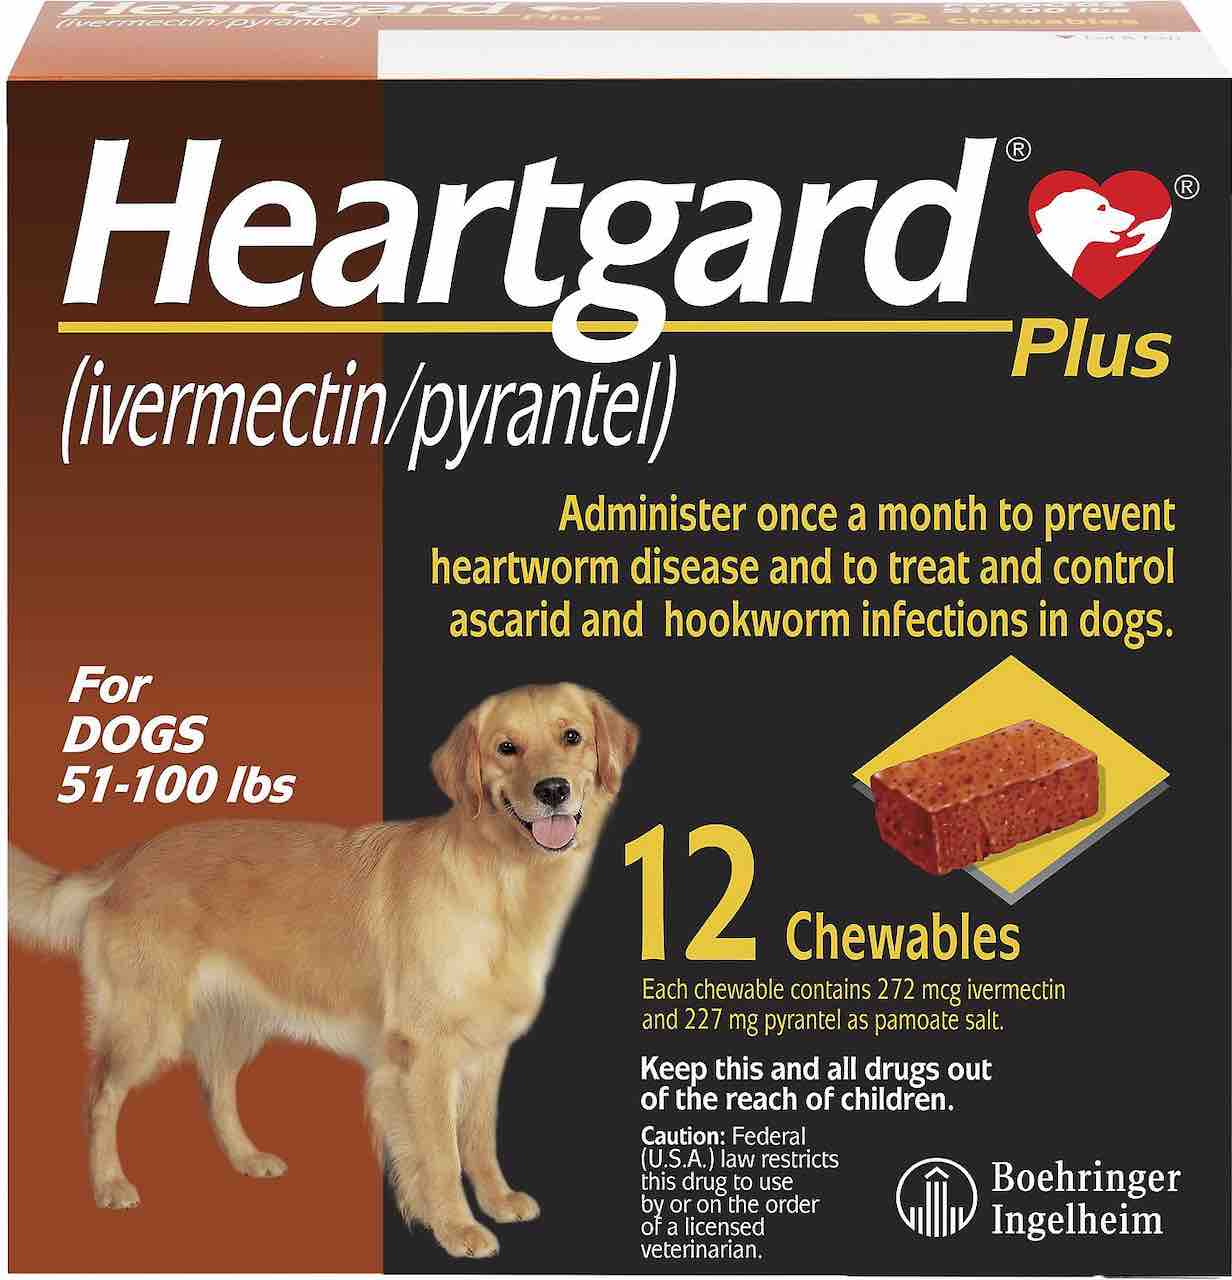 Heartgard Plus Chewables for dogs 51-100 lbs (Brown) 12 doses 1